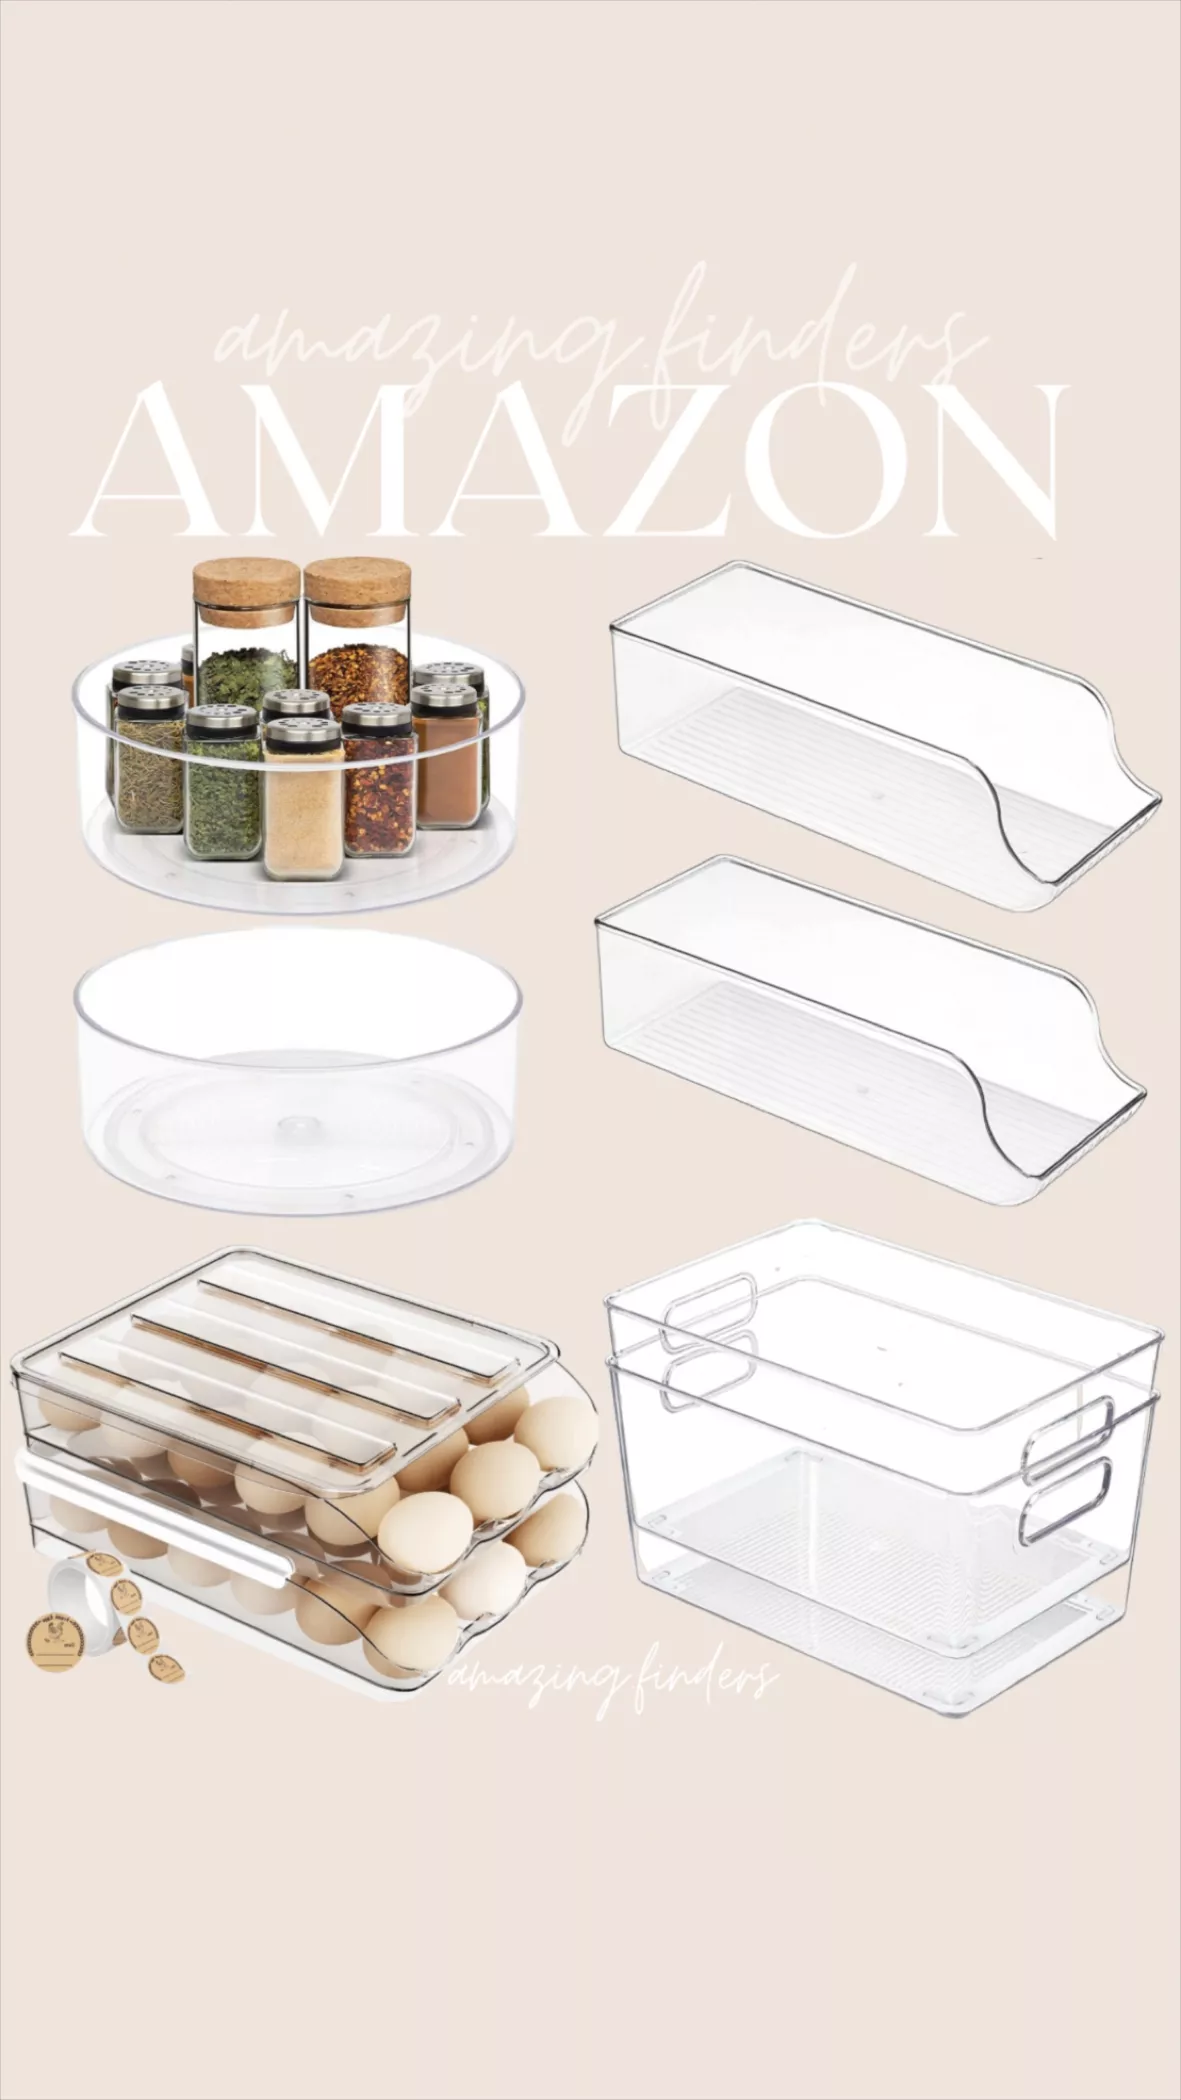 Puricon 2 Pack Lazy Susan Clear Organizer for Cabinet Pantry Storage, Rotating Tray for Fridge Bathroom Living Room Kitchen Spice Rack Organization